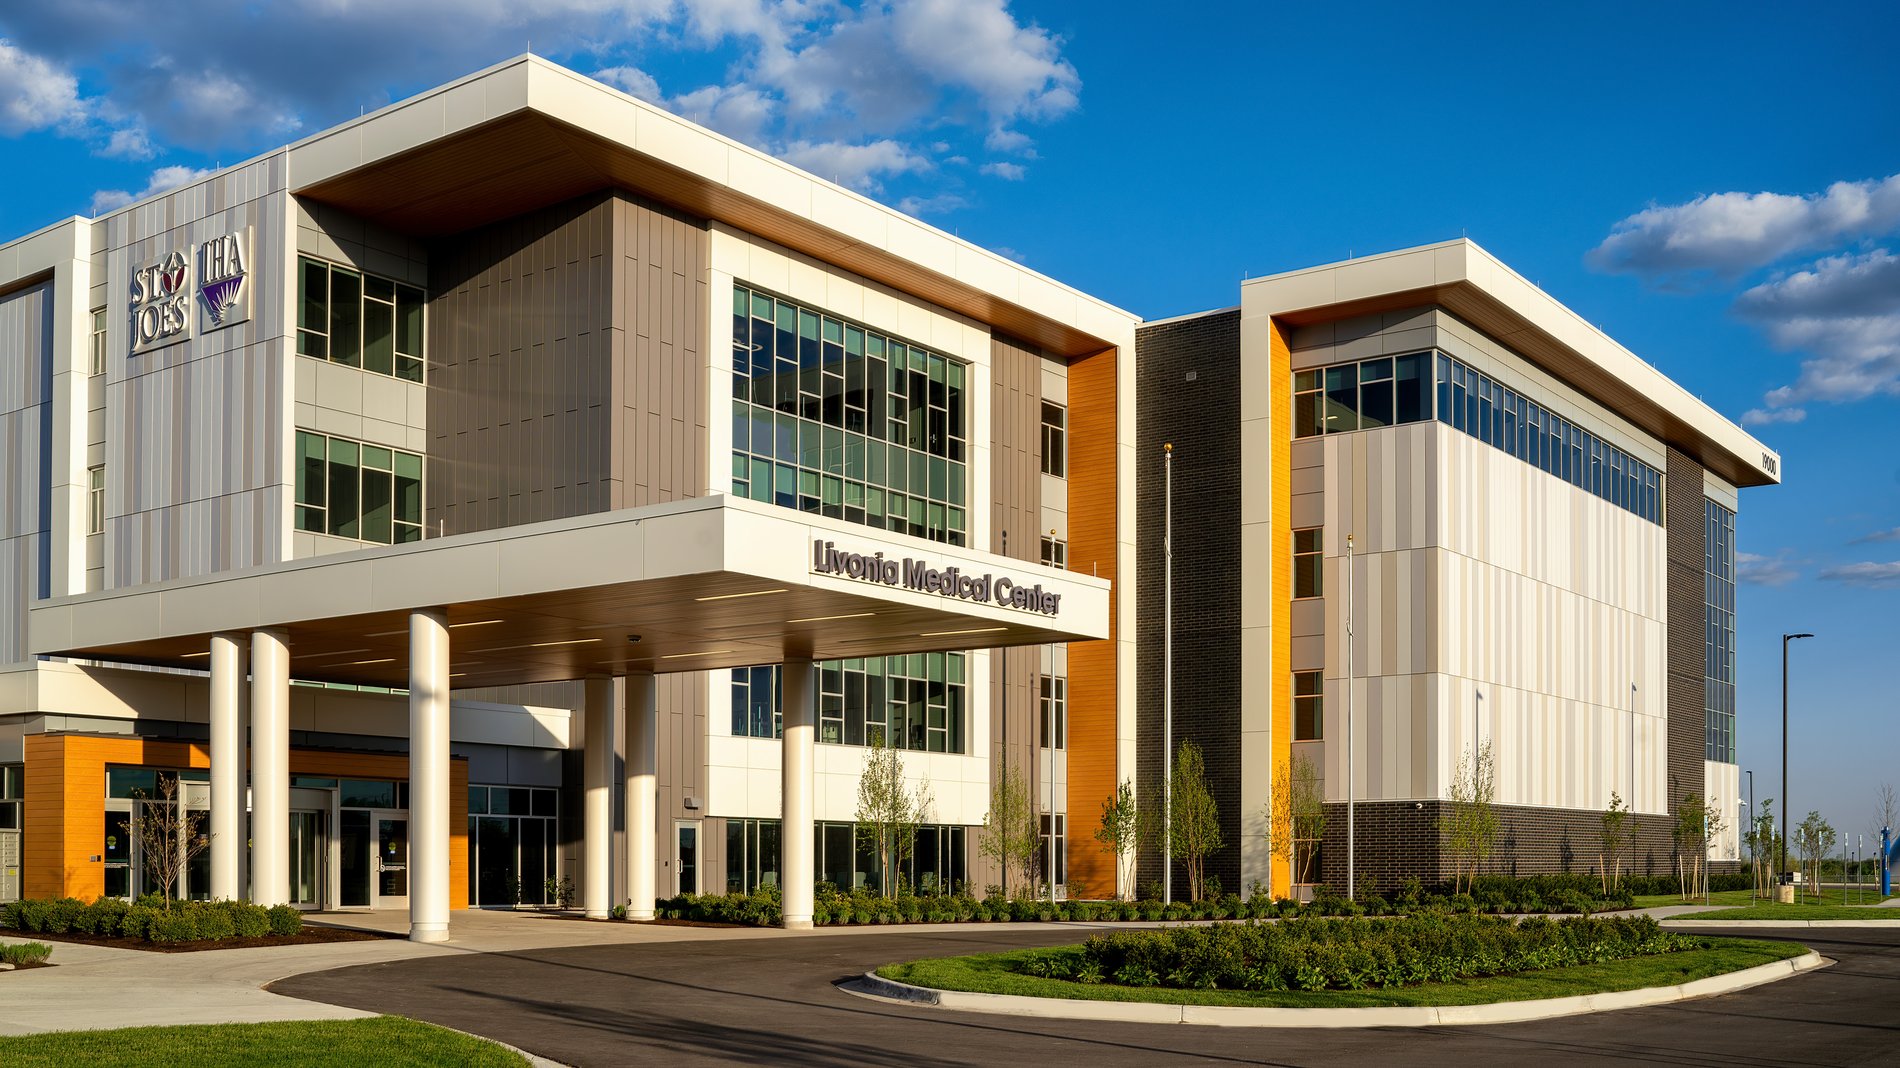 Trinity Health IHA Medical Group, Nurse Midwives - Schoolcraft Campus is located in the Livonia Medical Center.